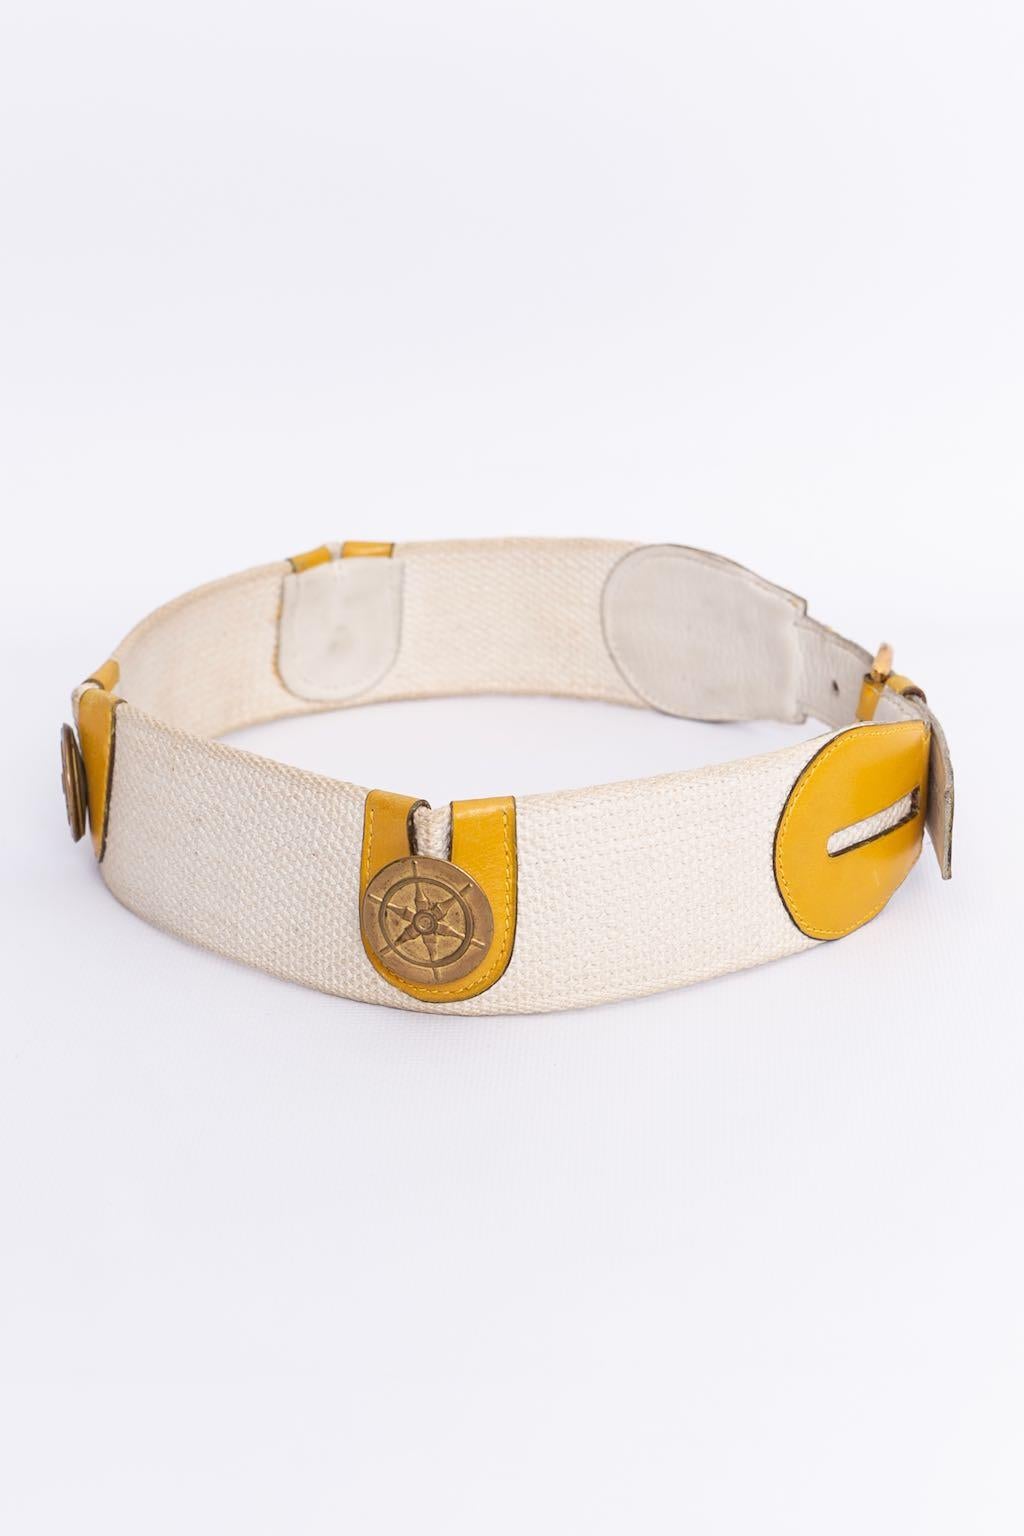 Women's or Men's Hermes Paris Canvas Belt in Yellow Leather, Adorned with Gilted Metal Elements For Sale